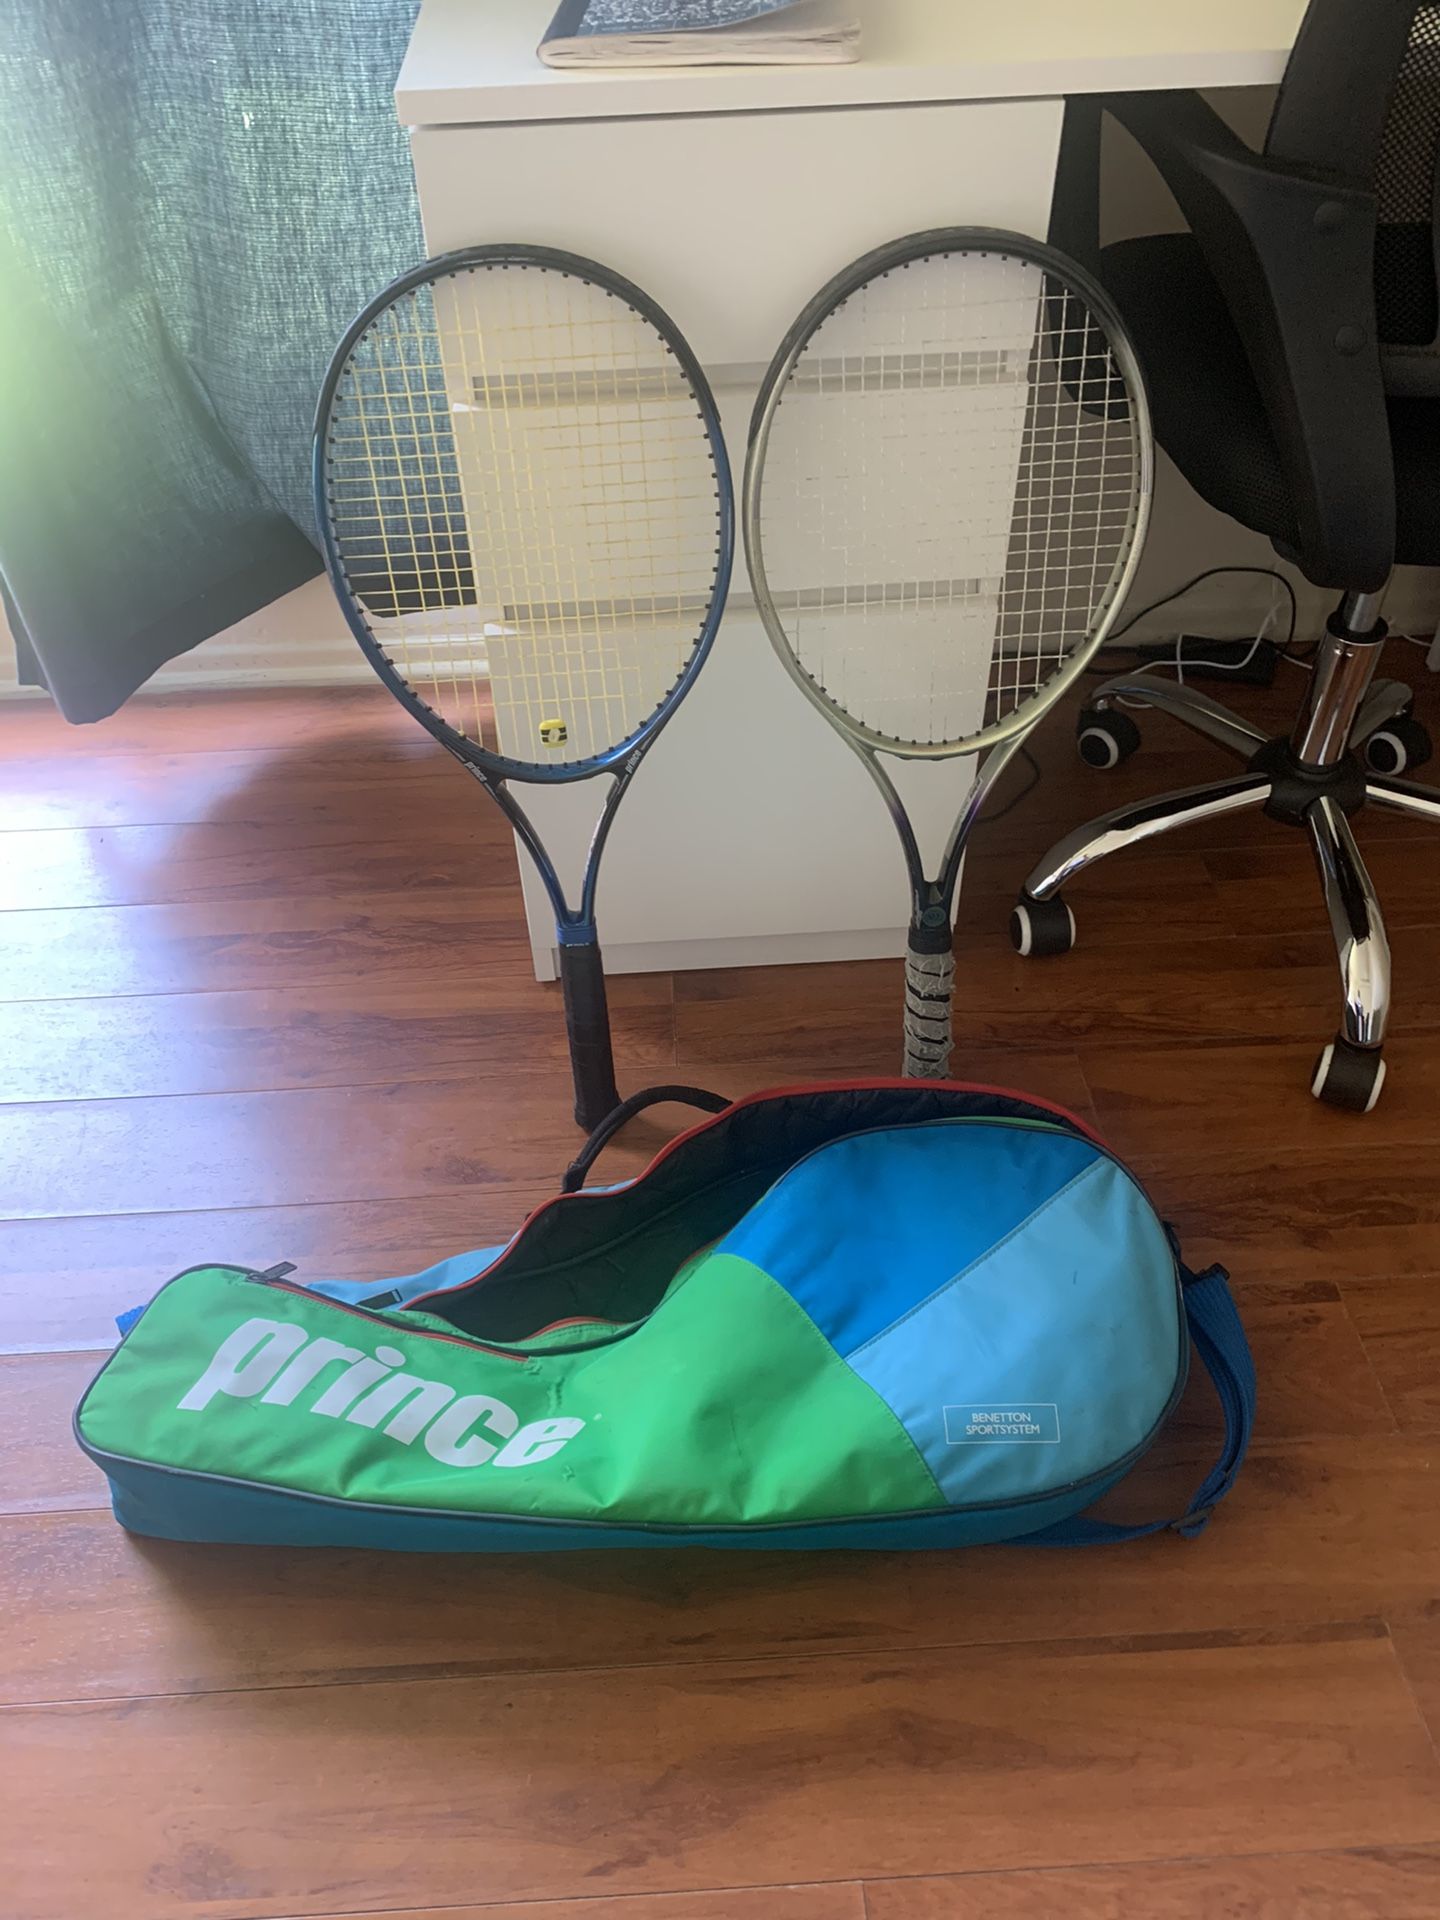 Prince tennis Raquets and carrying case